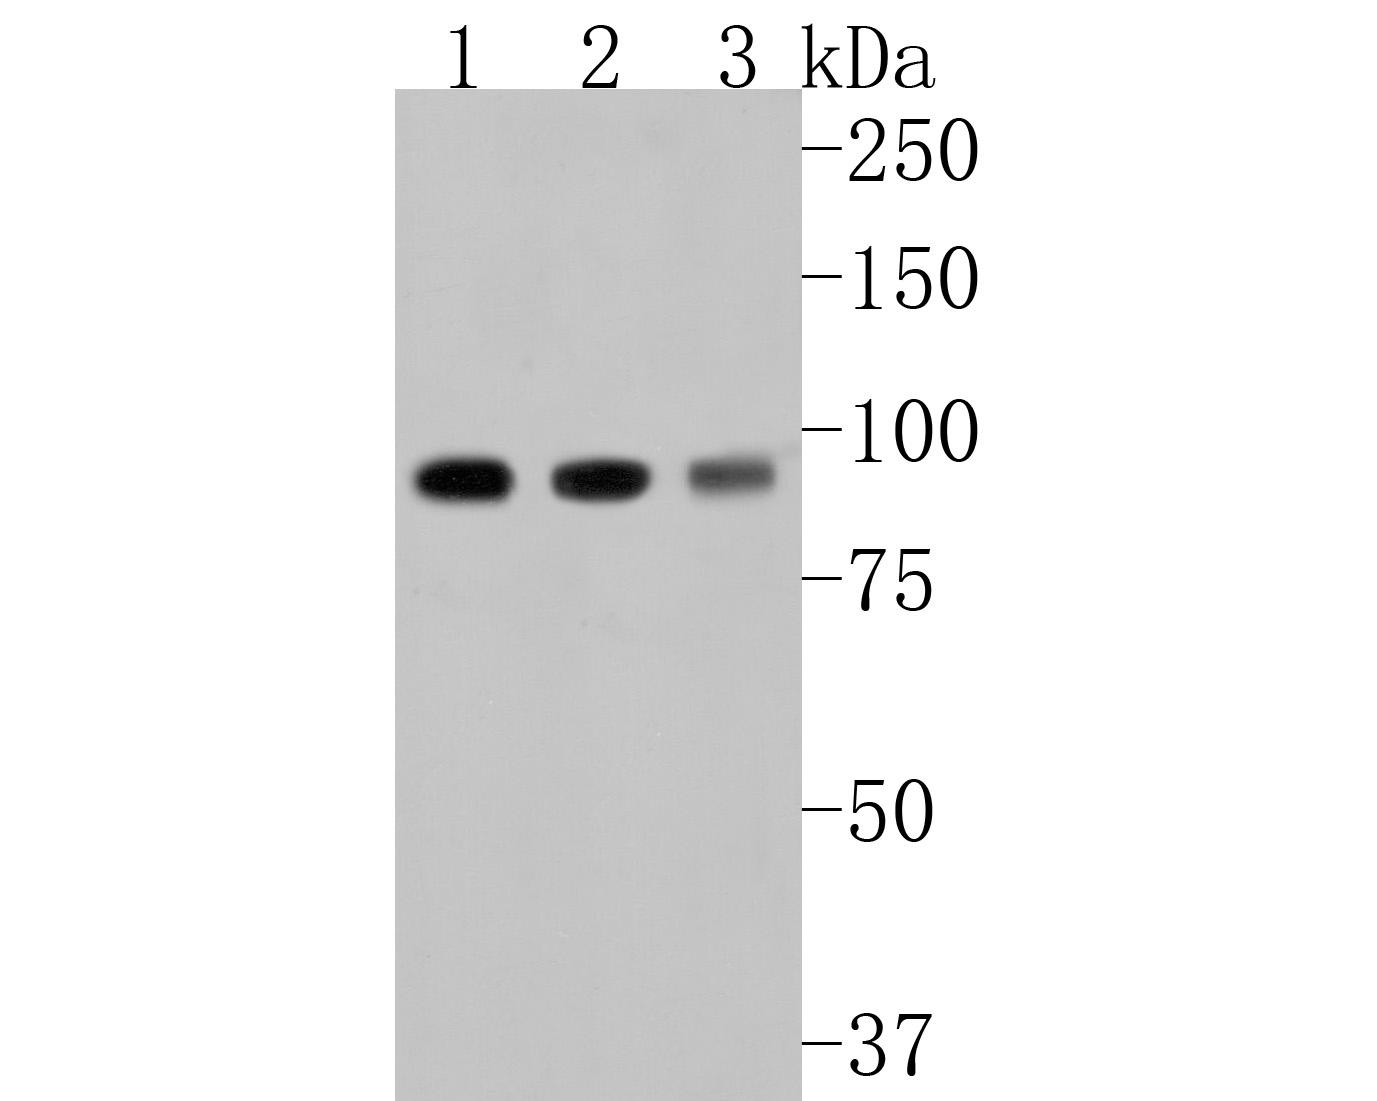 Western blot analysis of Beta-galactosidase on different lysates. Proteins were transferred to a PVDF membrane and blocked with 5% BSA in PBS for 1 hour at room temperature. The primary antibody (HA500132, 1/500) was used in 5% BSA at room temperature for 2 hours. Goat Anti-Rabbit IgG - HRP Secondary Antibody (HA1001) at 1:40,000 dilution was used for 1 hour at room temperature.<br />
Positive control: <br />
Lane 1: MCF-7 cell lysate<br />
Lane 2: Mouse pancreas tissue lysate<br />
Lane 3: Rat stomach tissue lysate